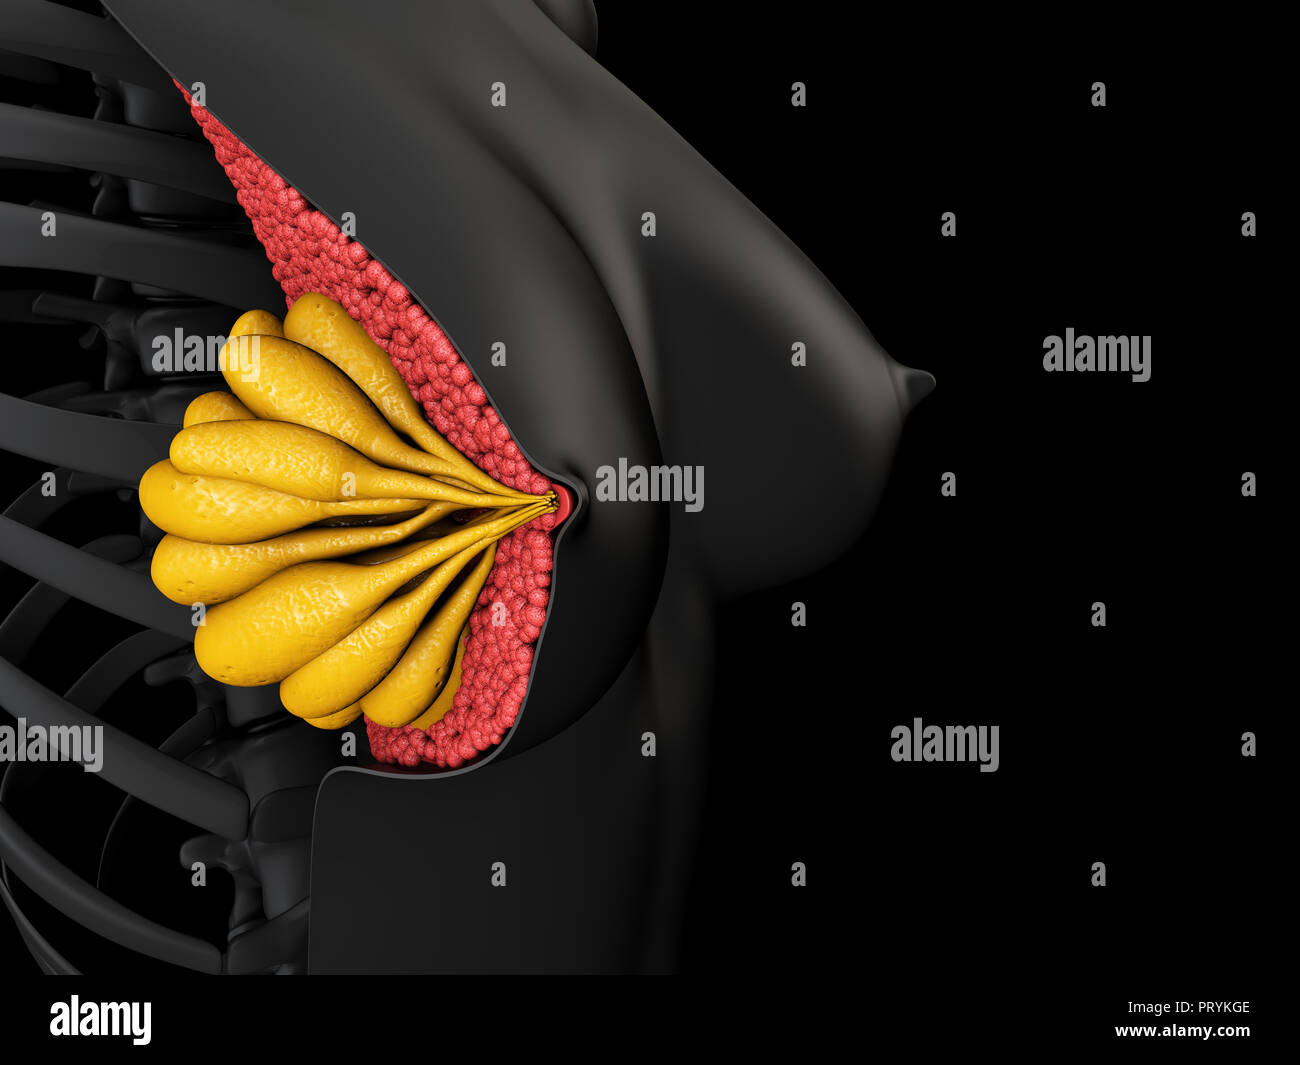 3d Illustration showing the female breast anatomy Stock Photo - Alamy